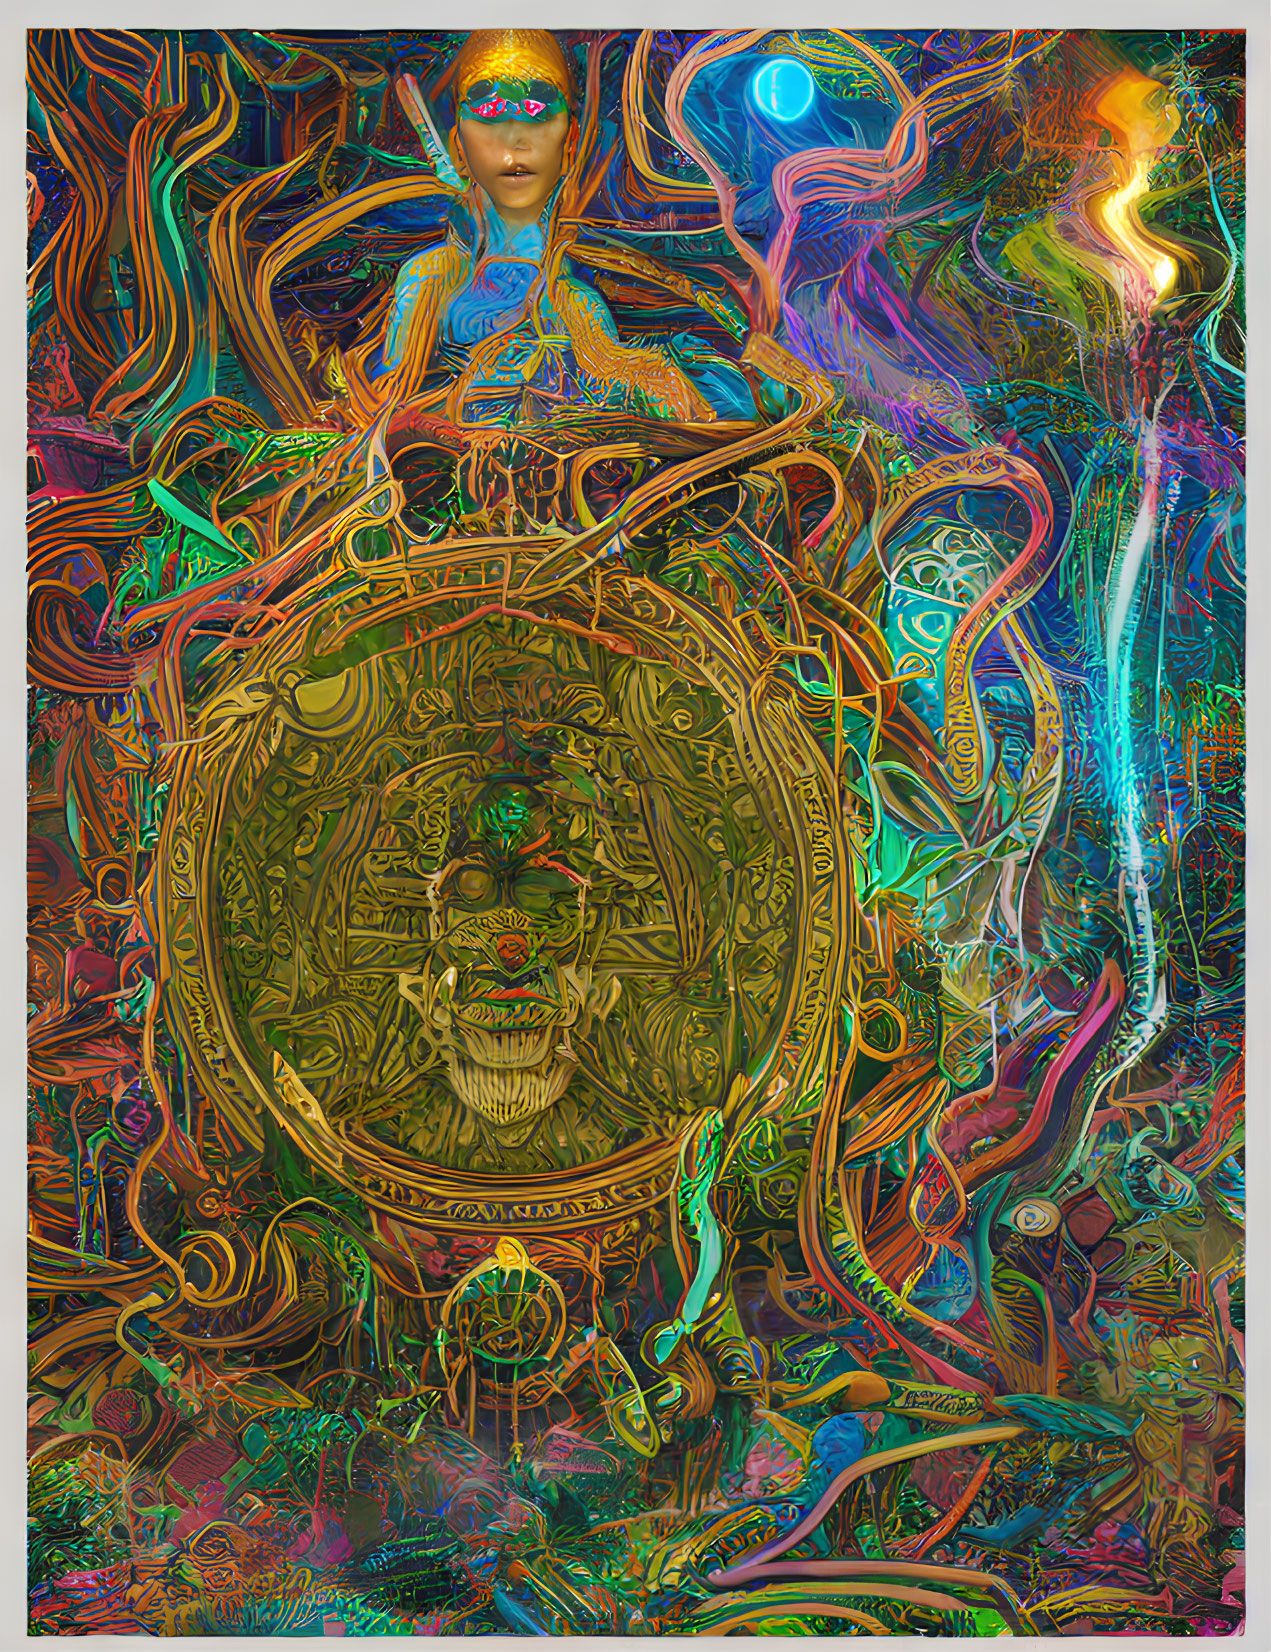 Colorful Psychedelic Digital Art with Central Humanoid Figure and Gold Mask